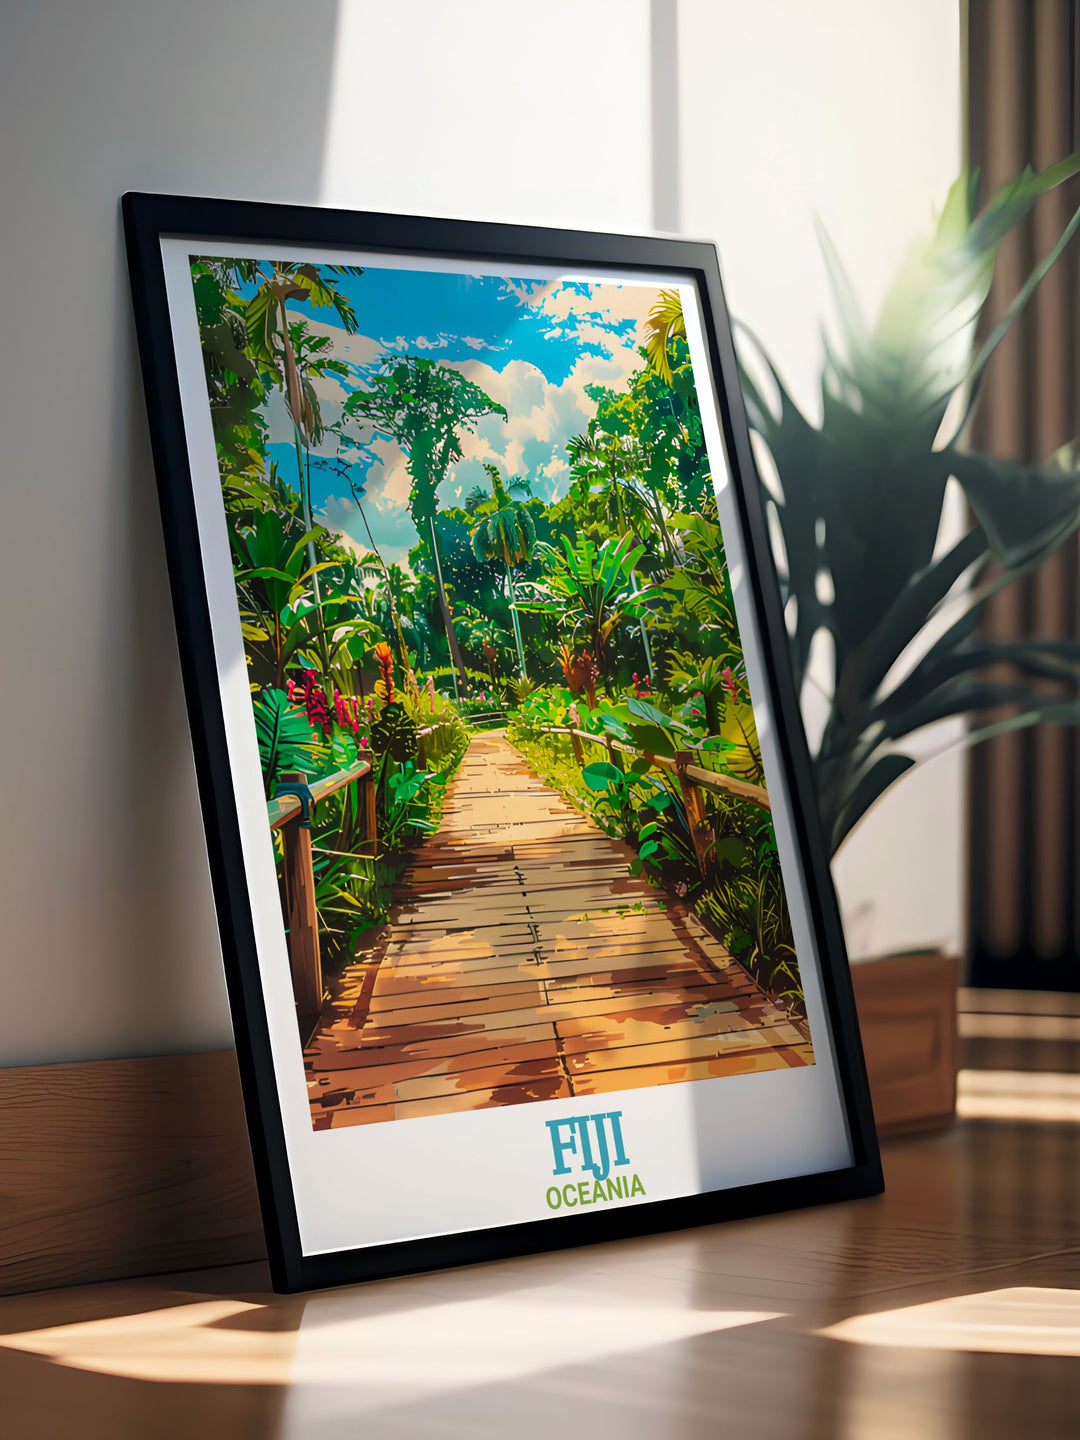 Fiji wall decor featuring a stunning depiction of Garden of the Sleeping Giant ideal for nature lovers. This Garden of the Sleeping Giant artwork adds a touch of tropical paradise to any room with its vibrant colors and detailed scenery.